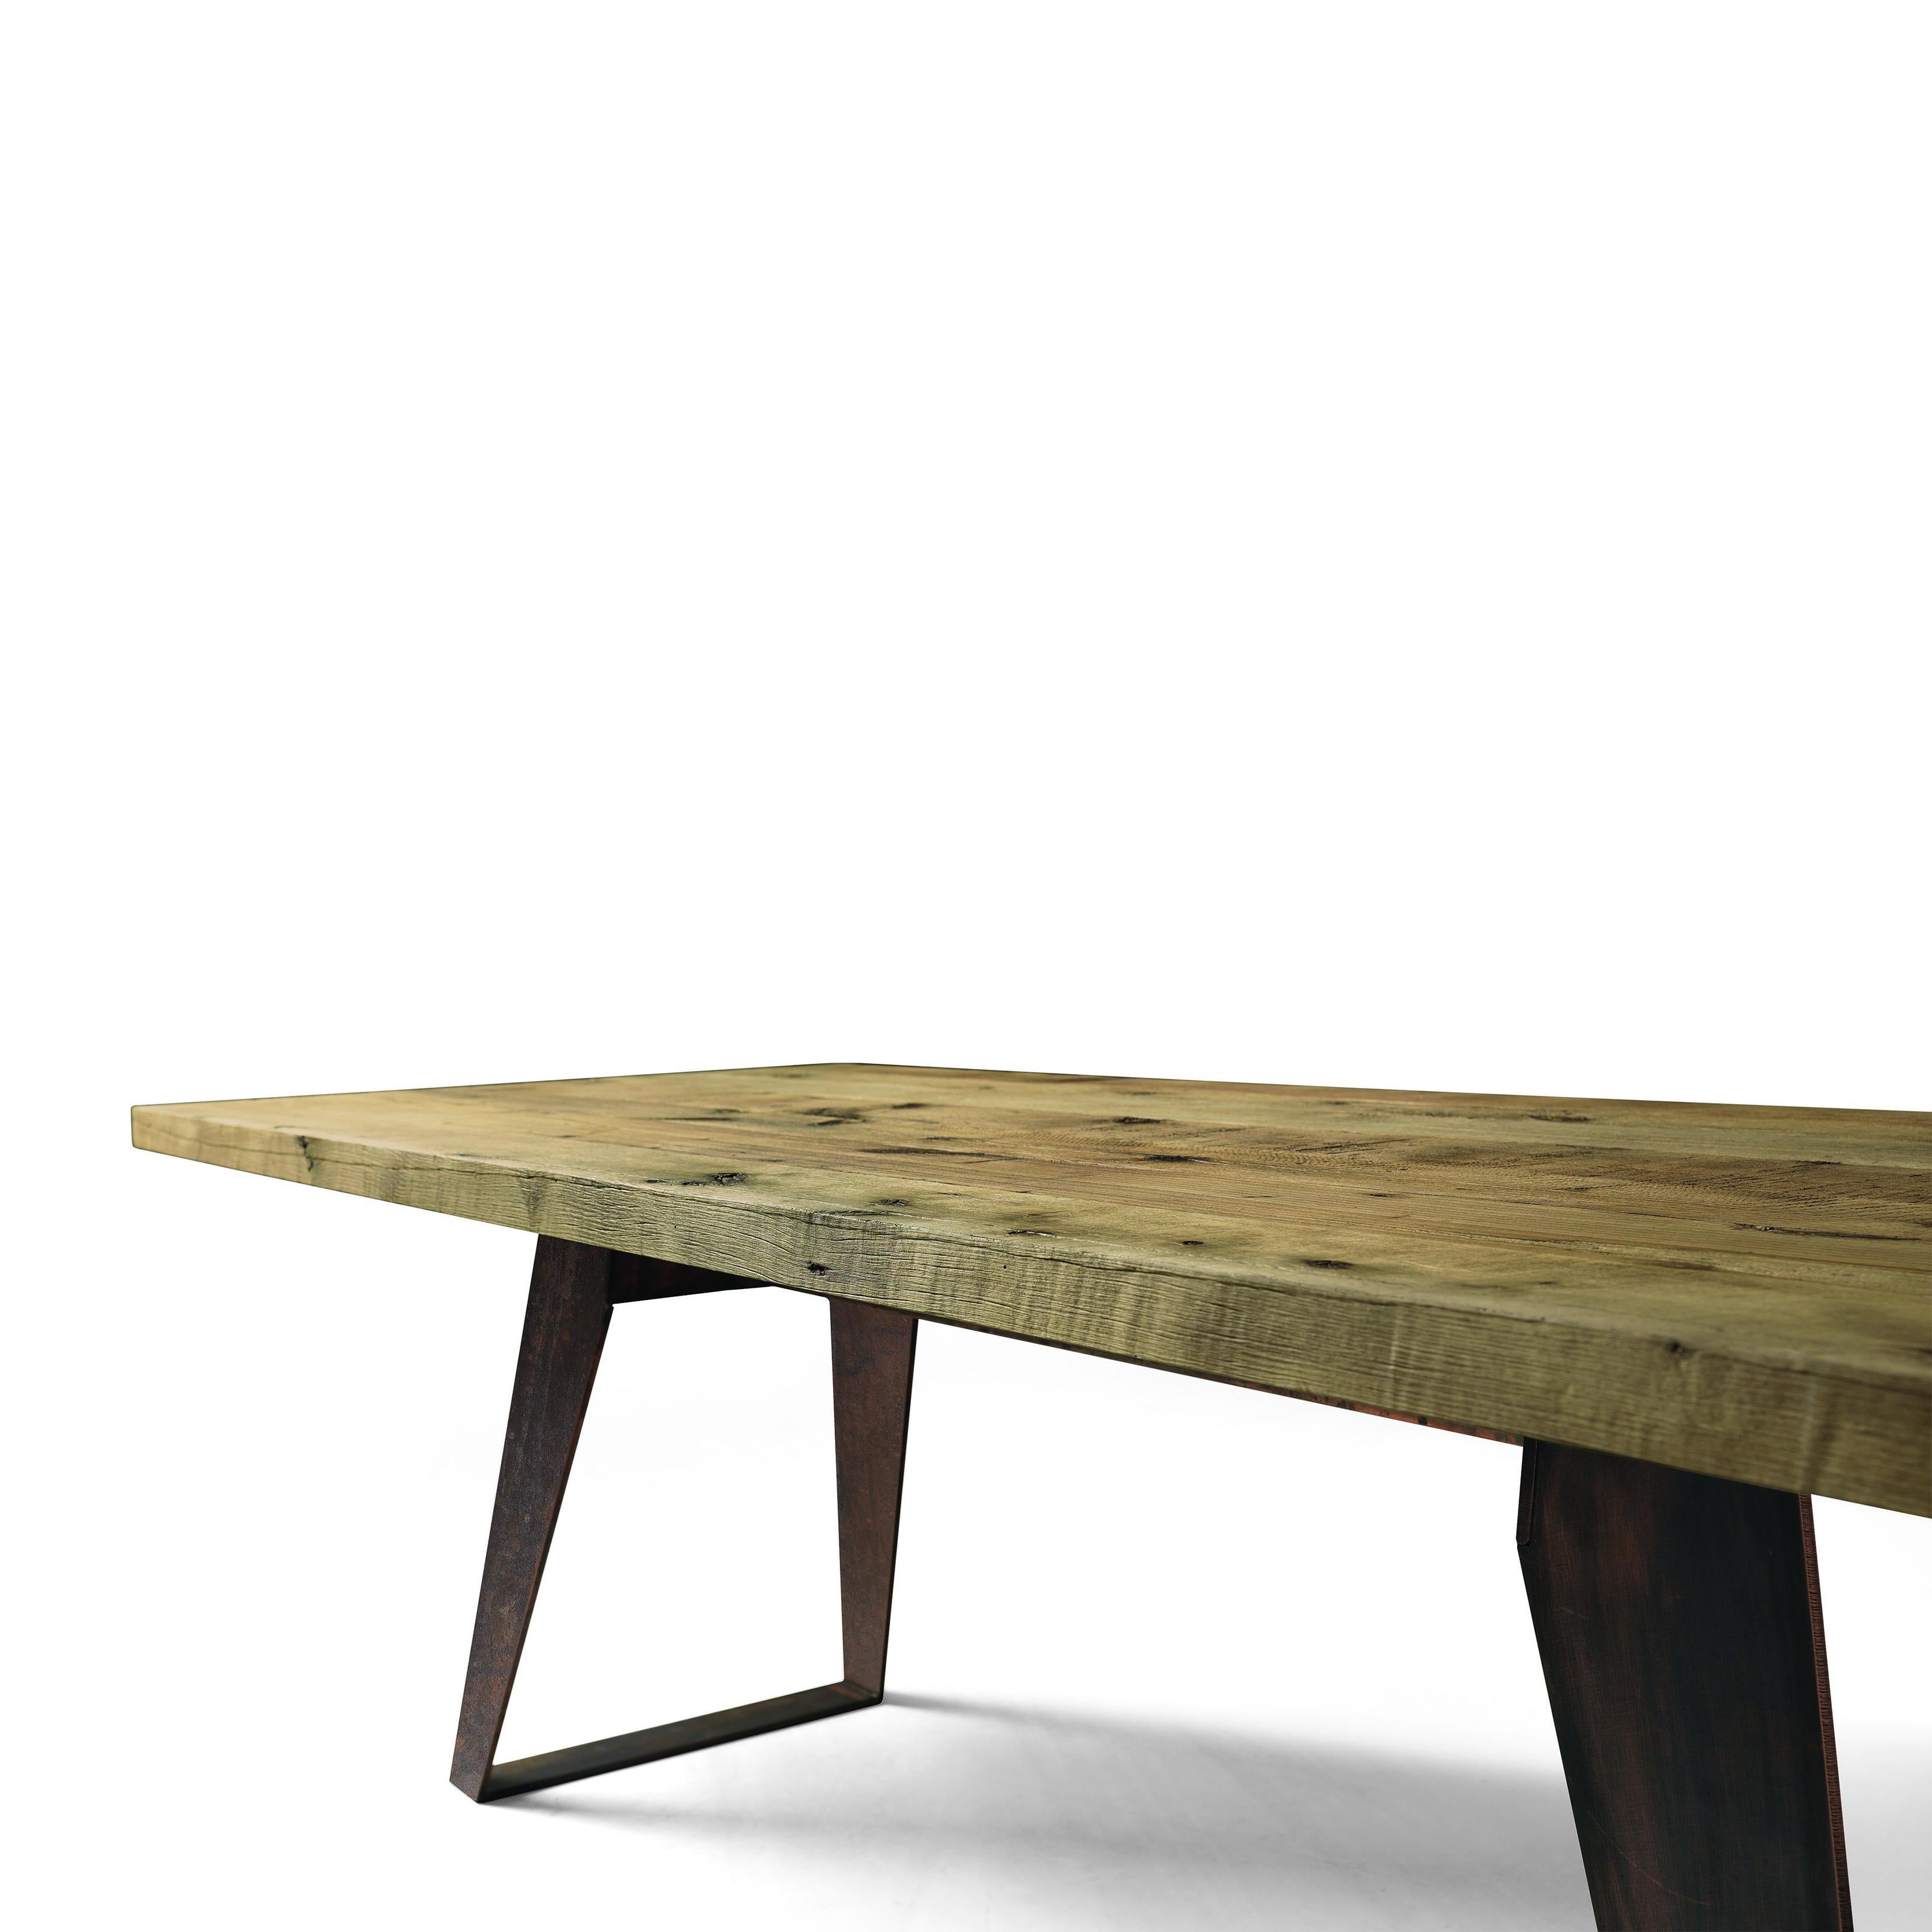 Modern Misura Solid Wood Table, Ontano in Hand-Made Natural Finish, Contemporary For Sale